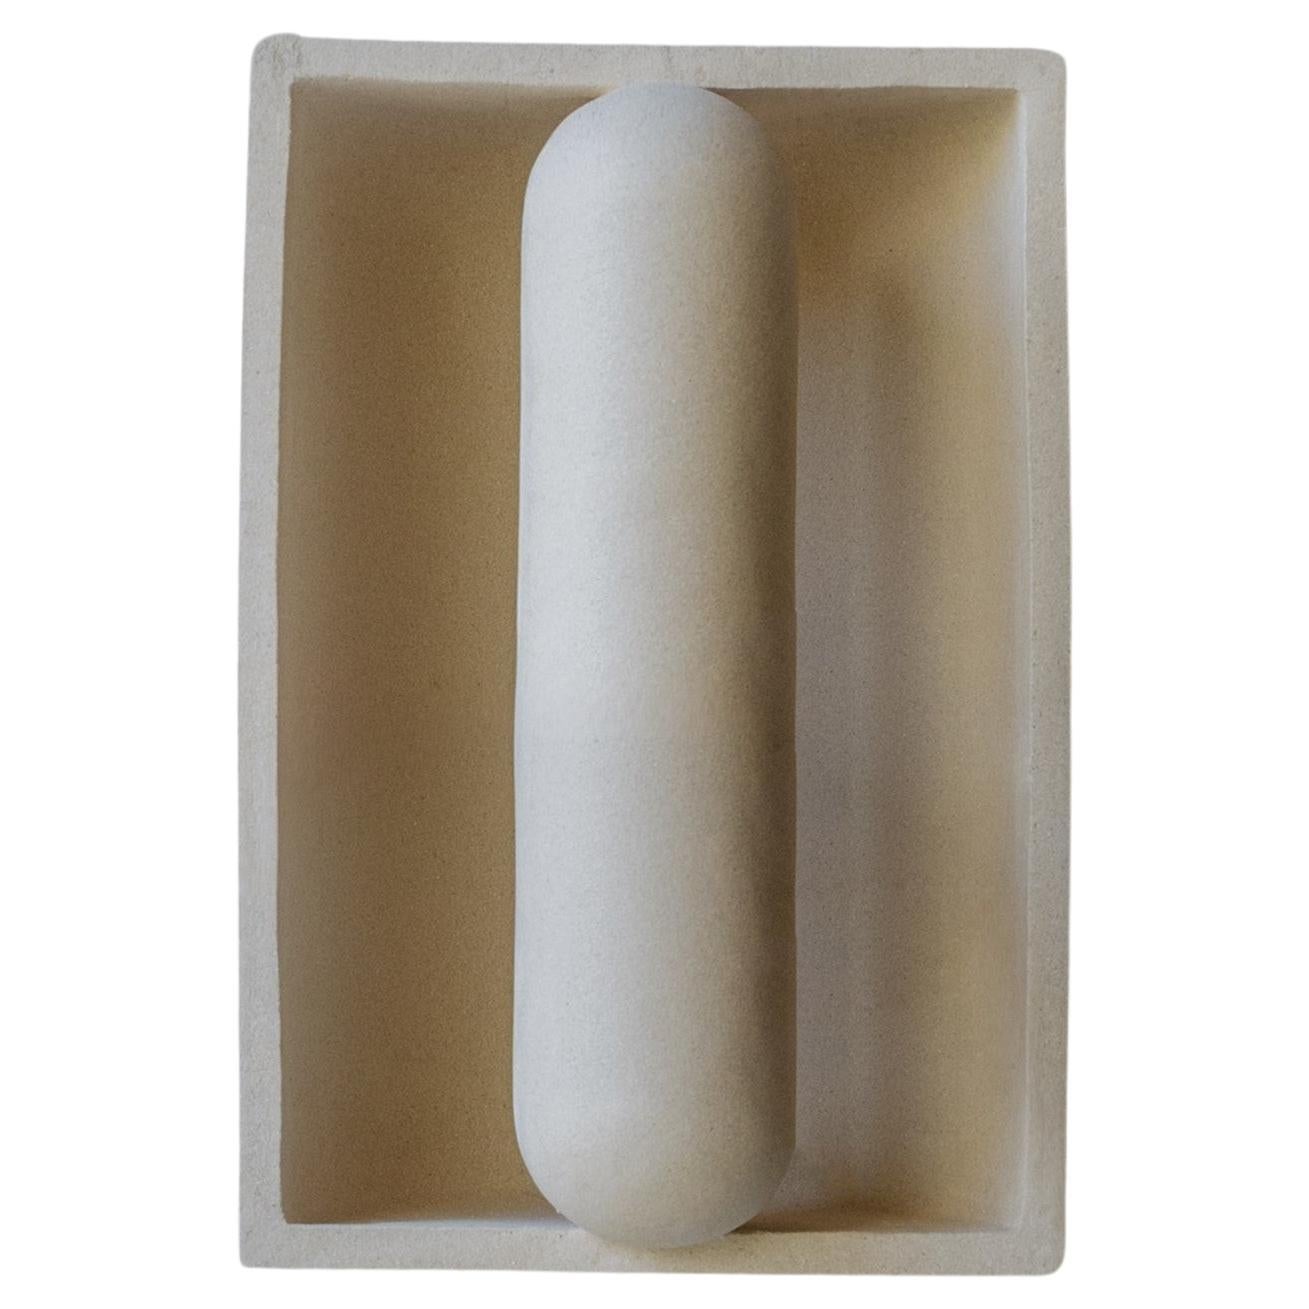 Kyrtos Wall Light by Lisa Allegra For Sale